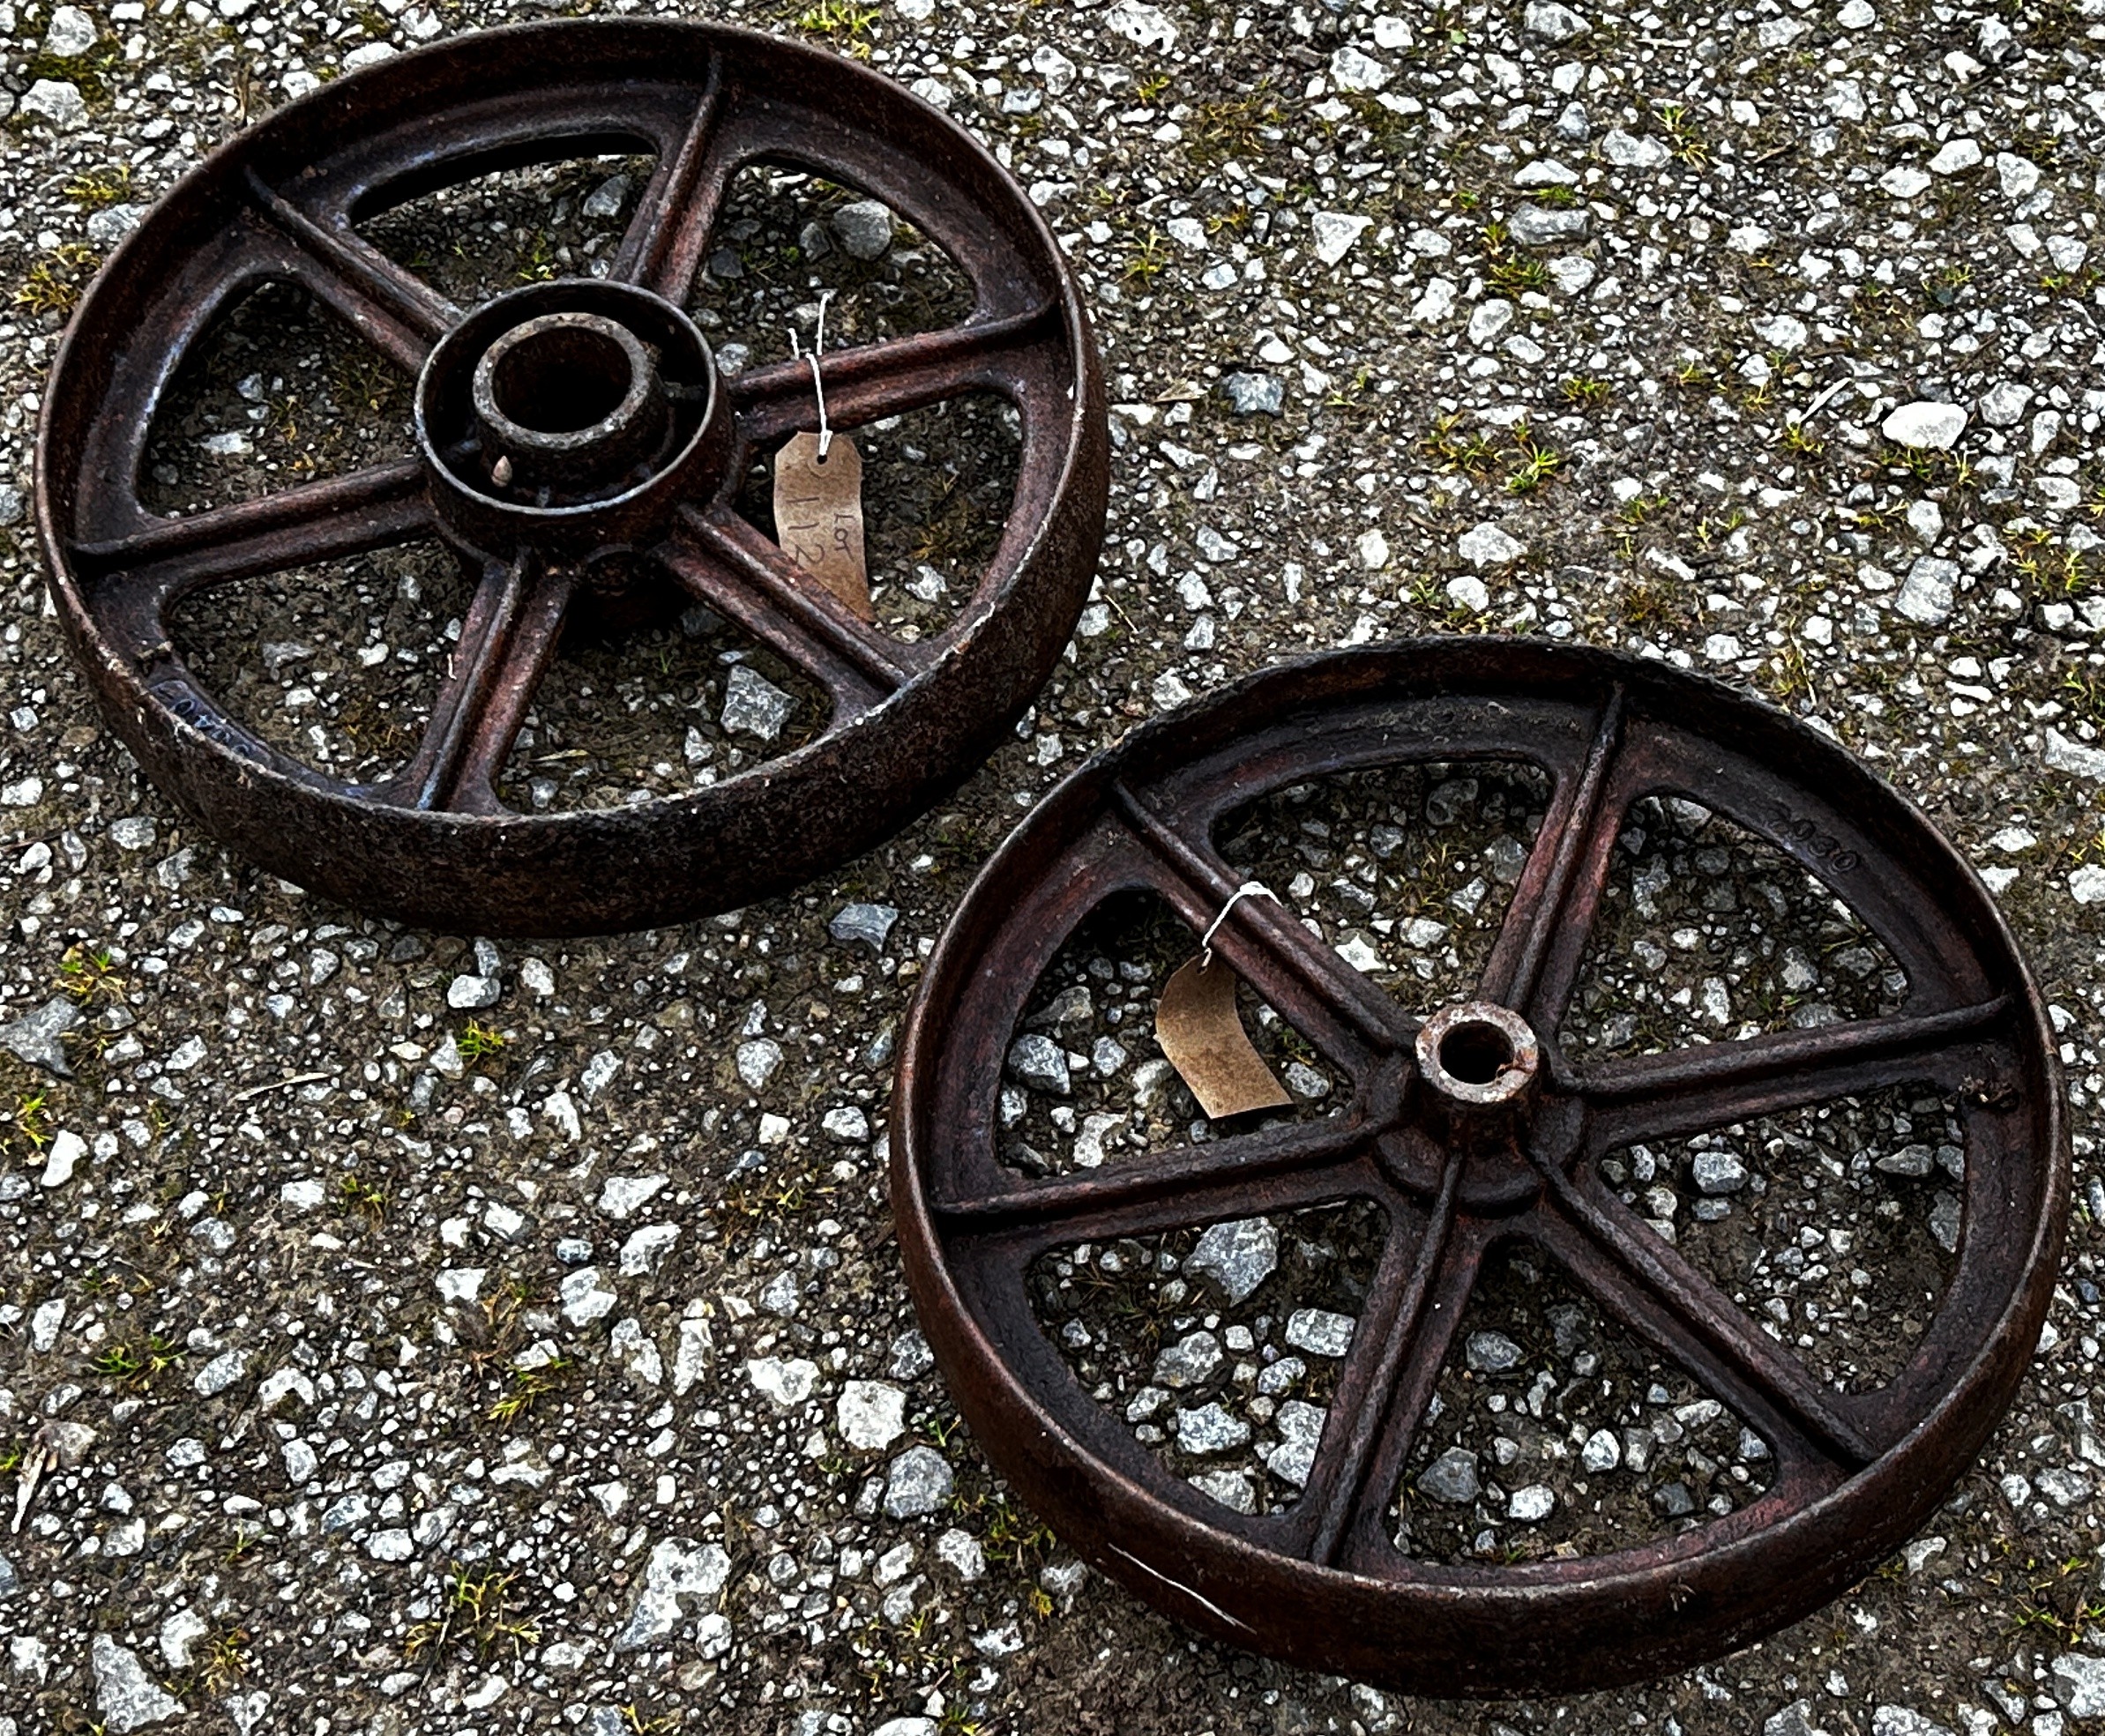 A pair of vintage cast iron implement wheels stamped with numbers 9340, 44 cm diameter